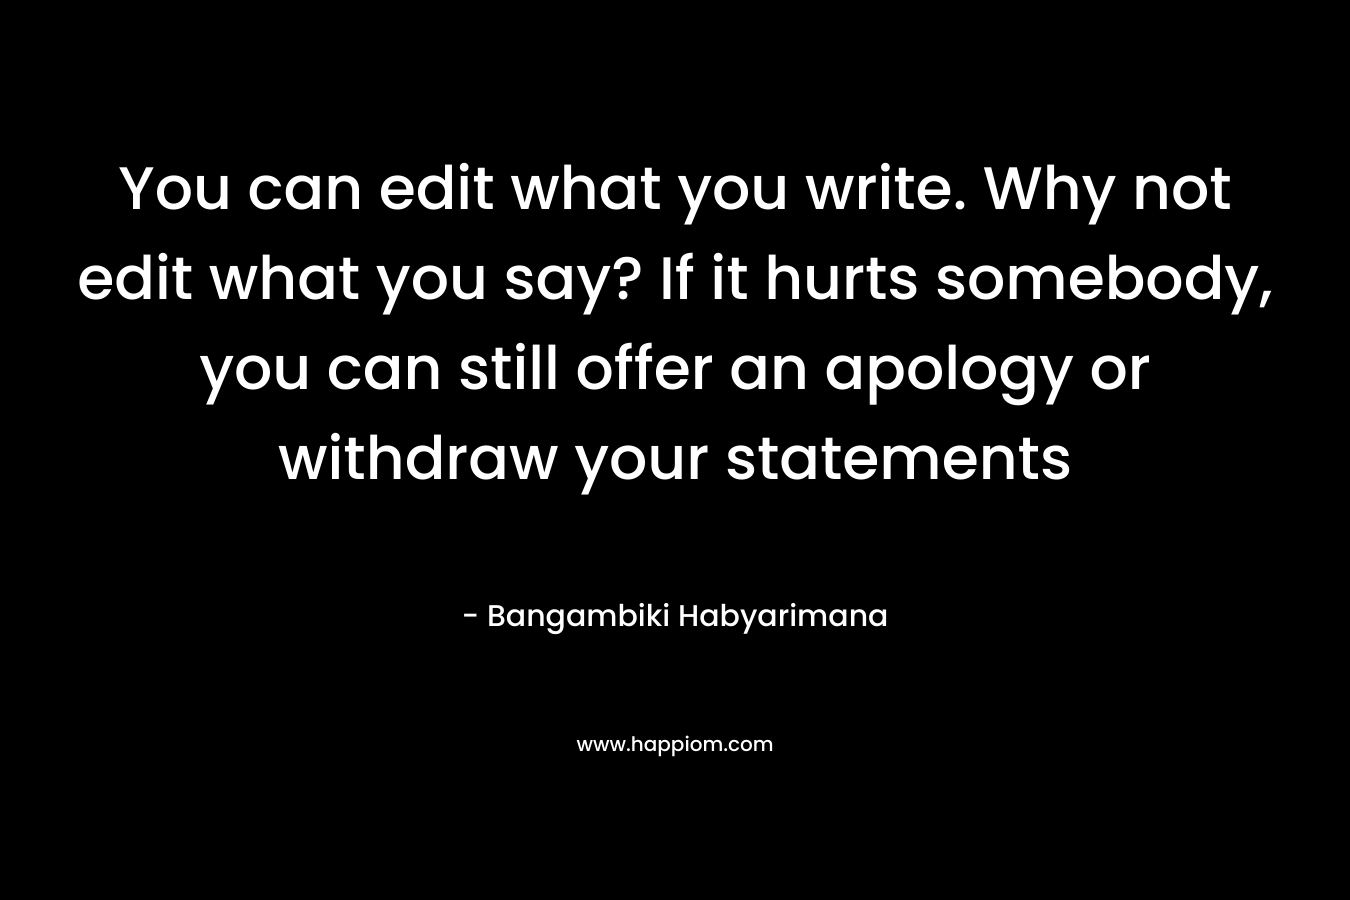 You can edit what you write. Why not edit what you say? If it hurts somebody, you can still offer an apology or withdraw your statements – Bangambiki Habyarimana